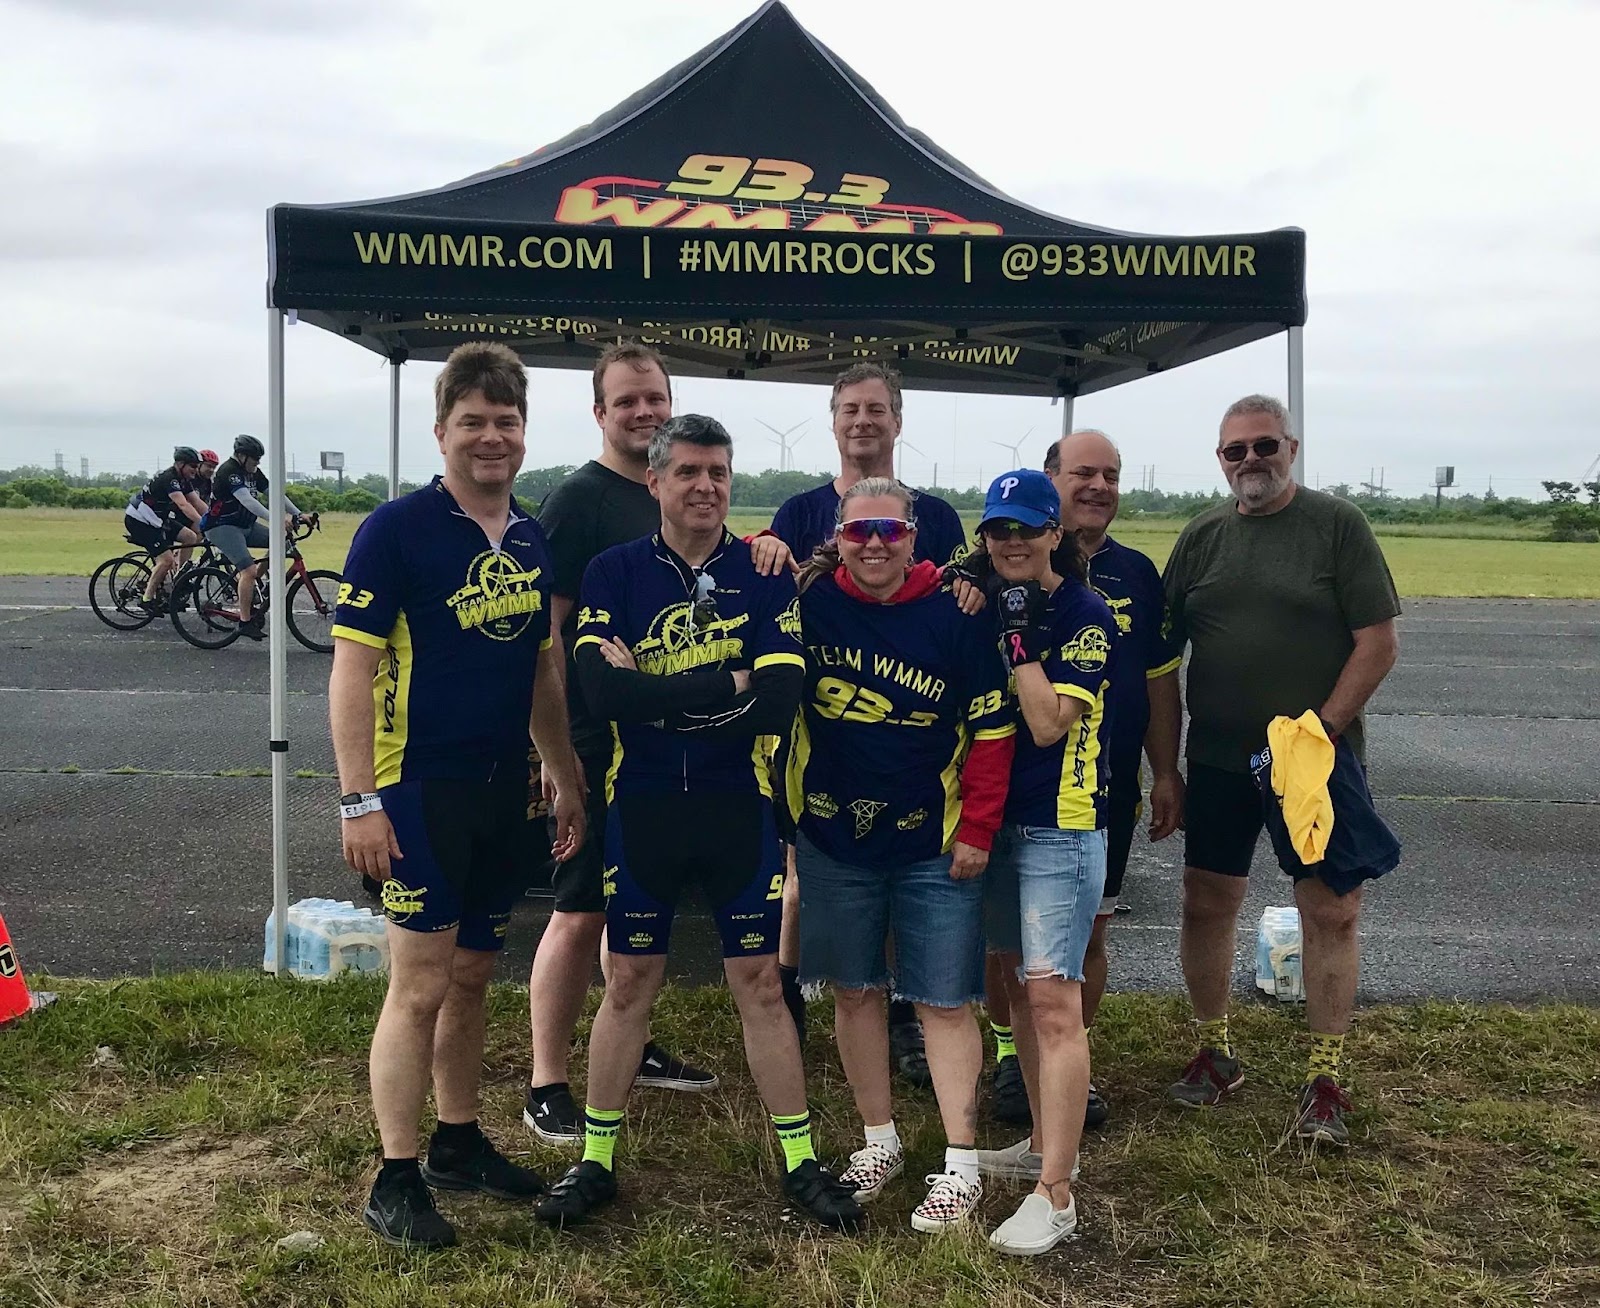 Several members of the Tamman family pose by the Team WMMR tent during the Bike-a-thon.